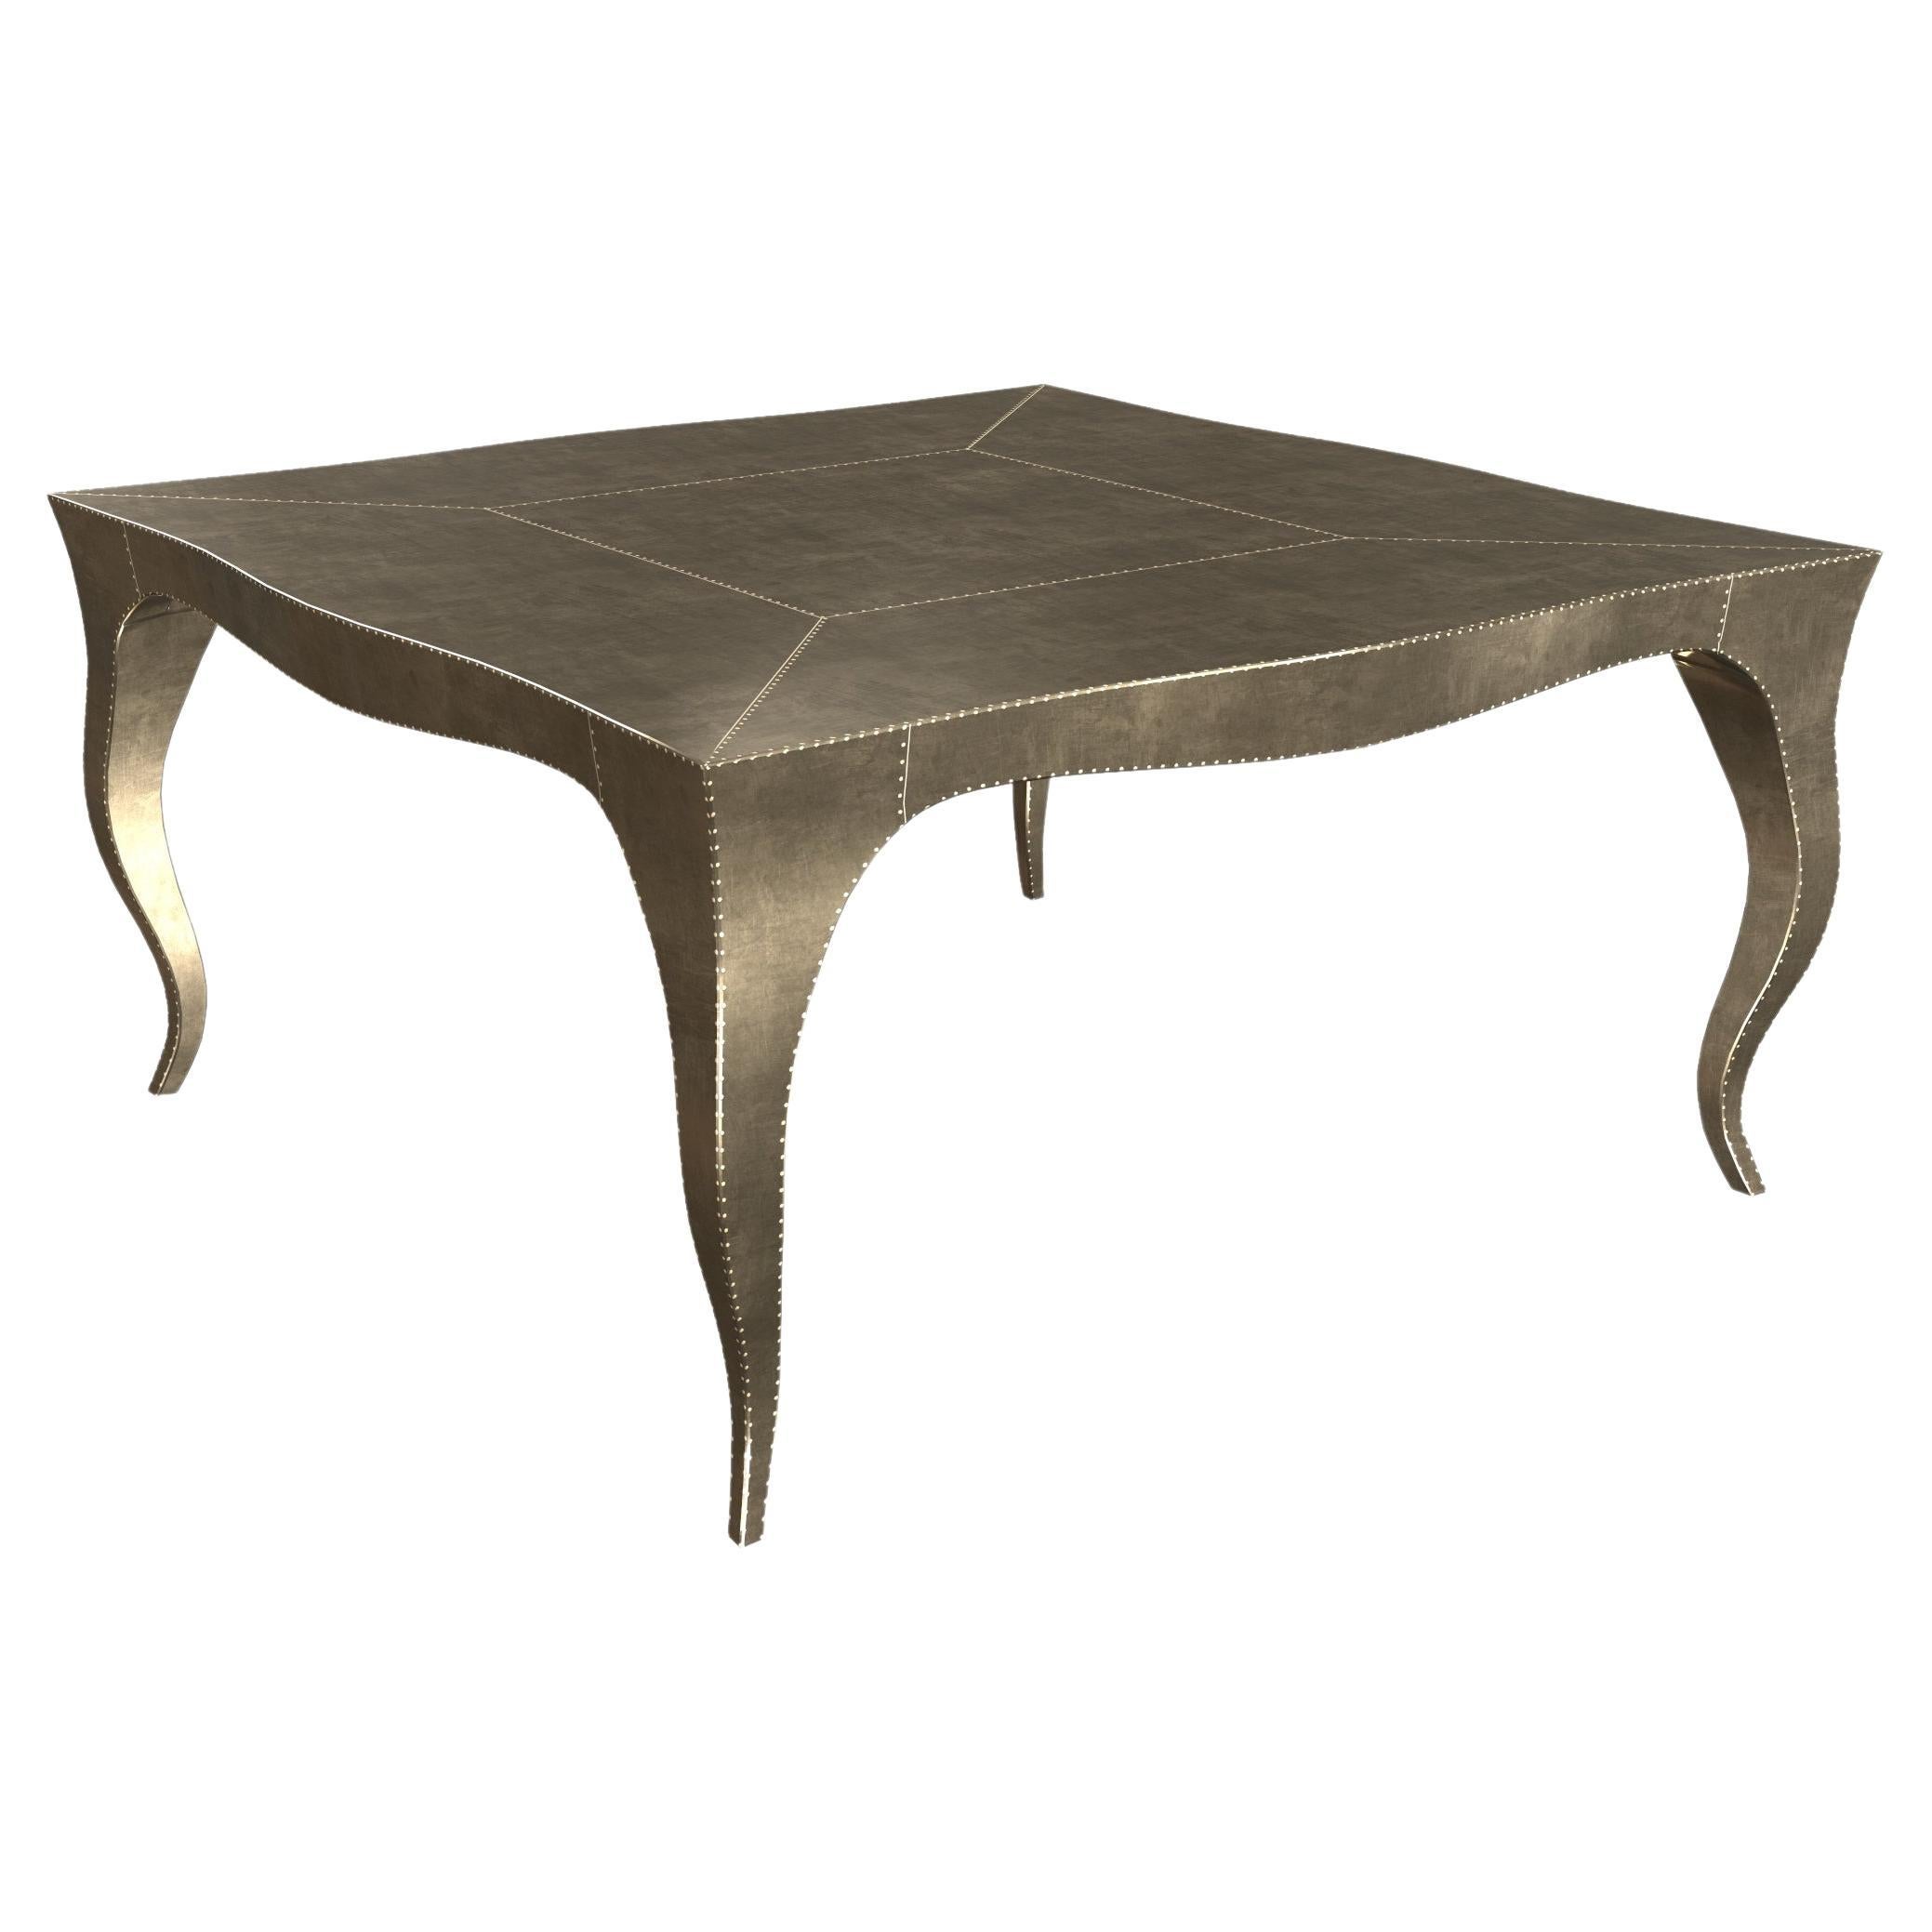 Louise Art Deco Nesting Tables Smooth Brass 18.5x18.5x10 inch by Paul M. en vente